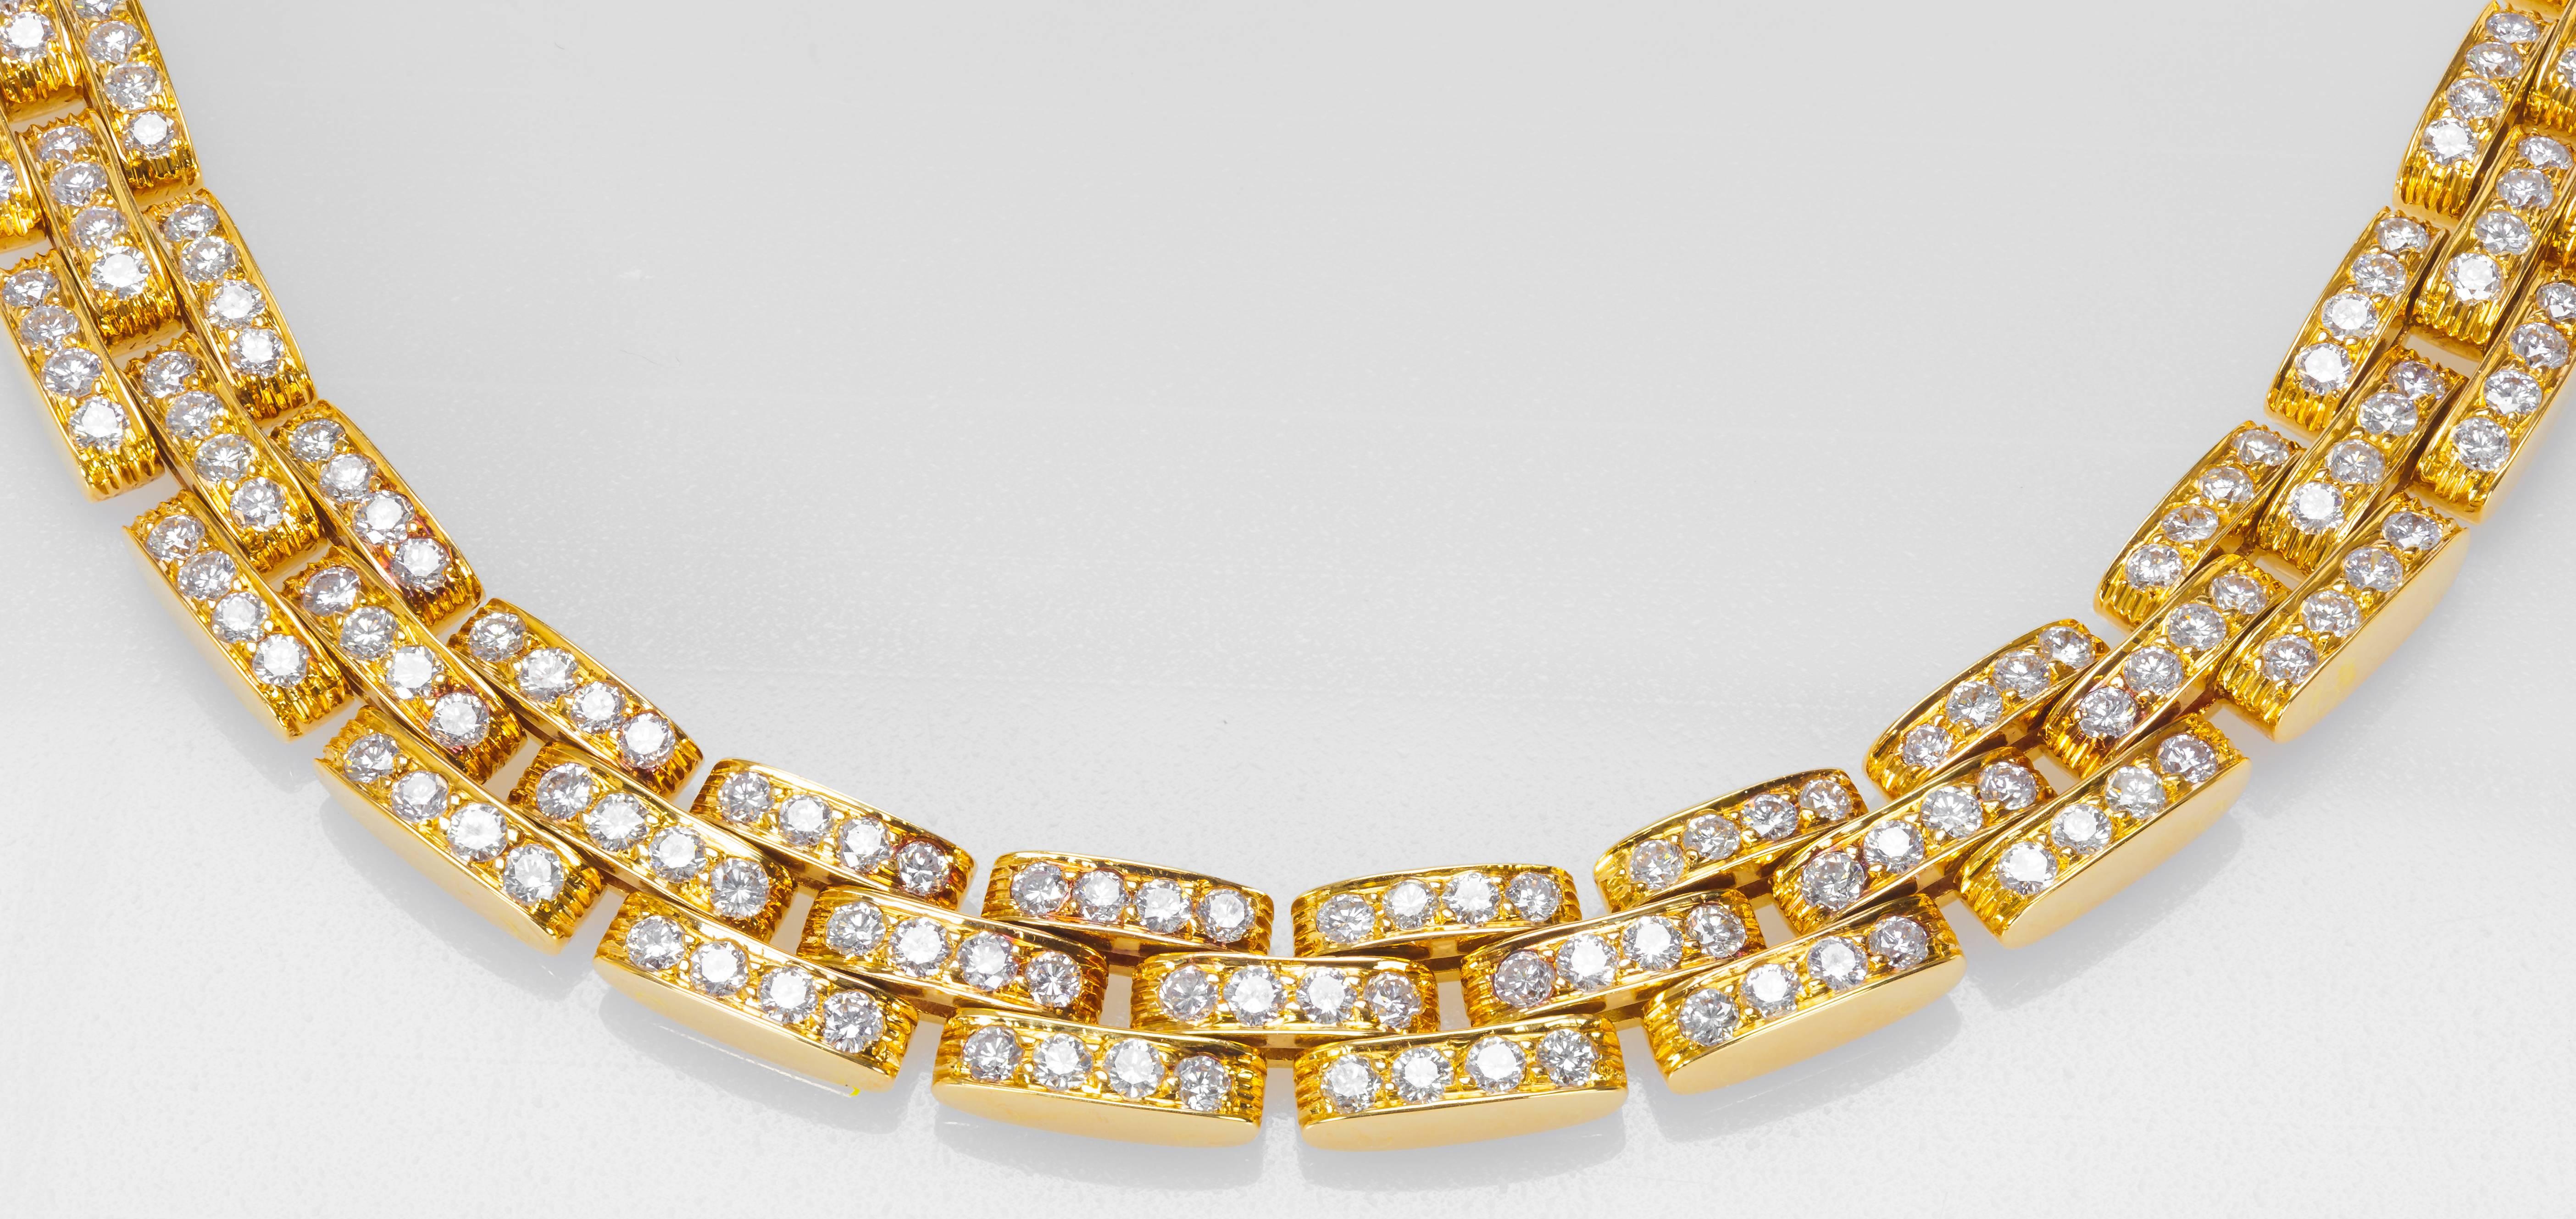 This gorgeous Cartier necklace from the Panthère de Cartier collection is set with 452 diamonds. It comes with its original box and measures 41 cm long (~16 inches). 

This necklace is in excellent condition and could pass for new. It was lightly